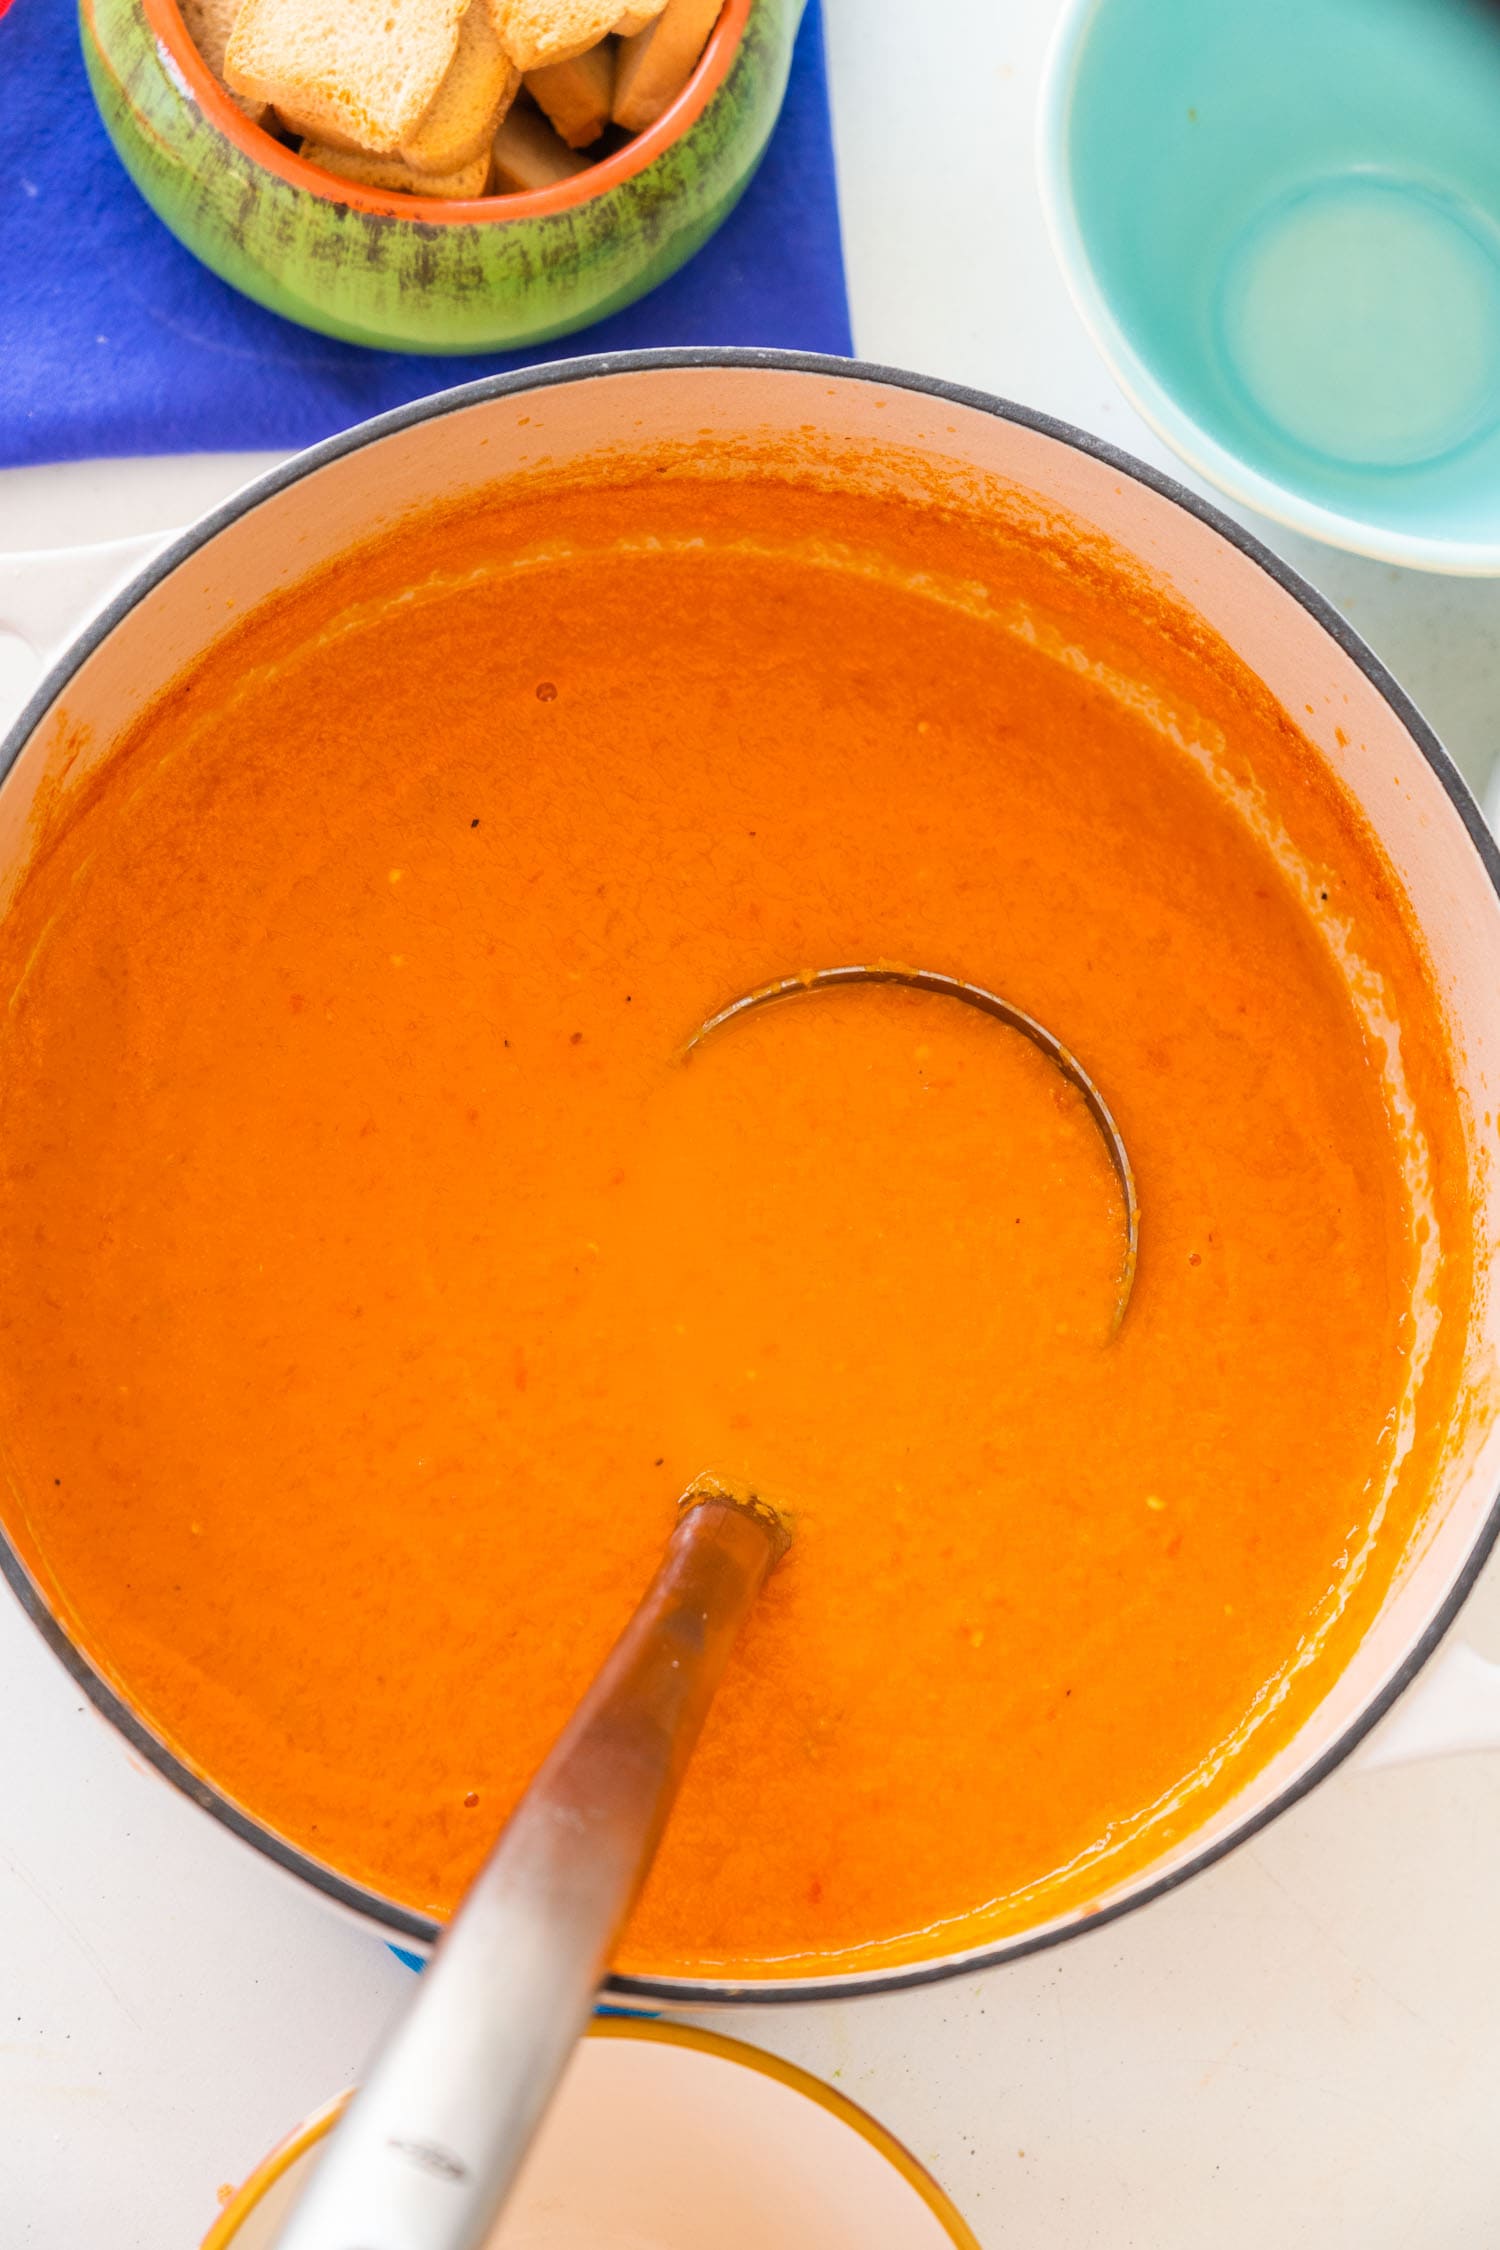 Fresh Tomato Soup from Garden Tomatoes